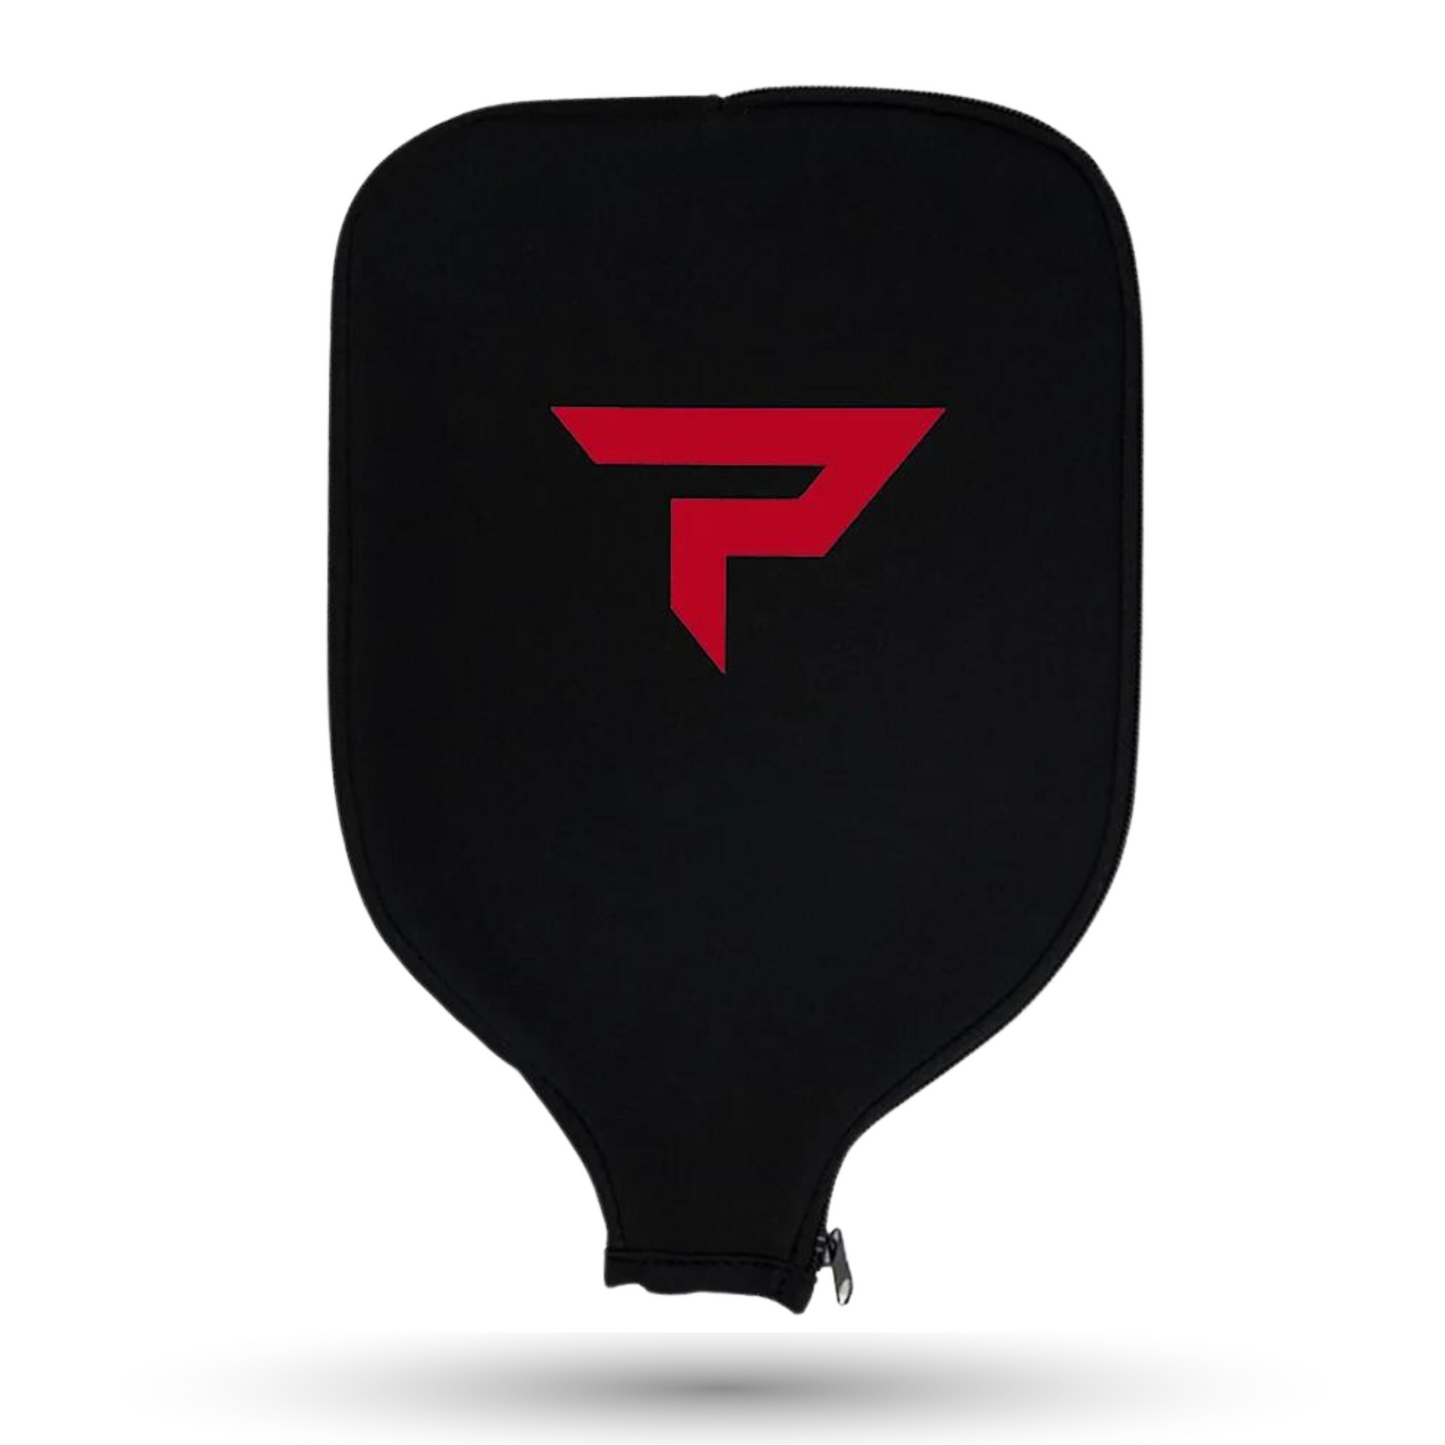 Paddletek Paddle cover in red (Wildfire)